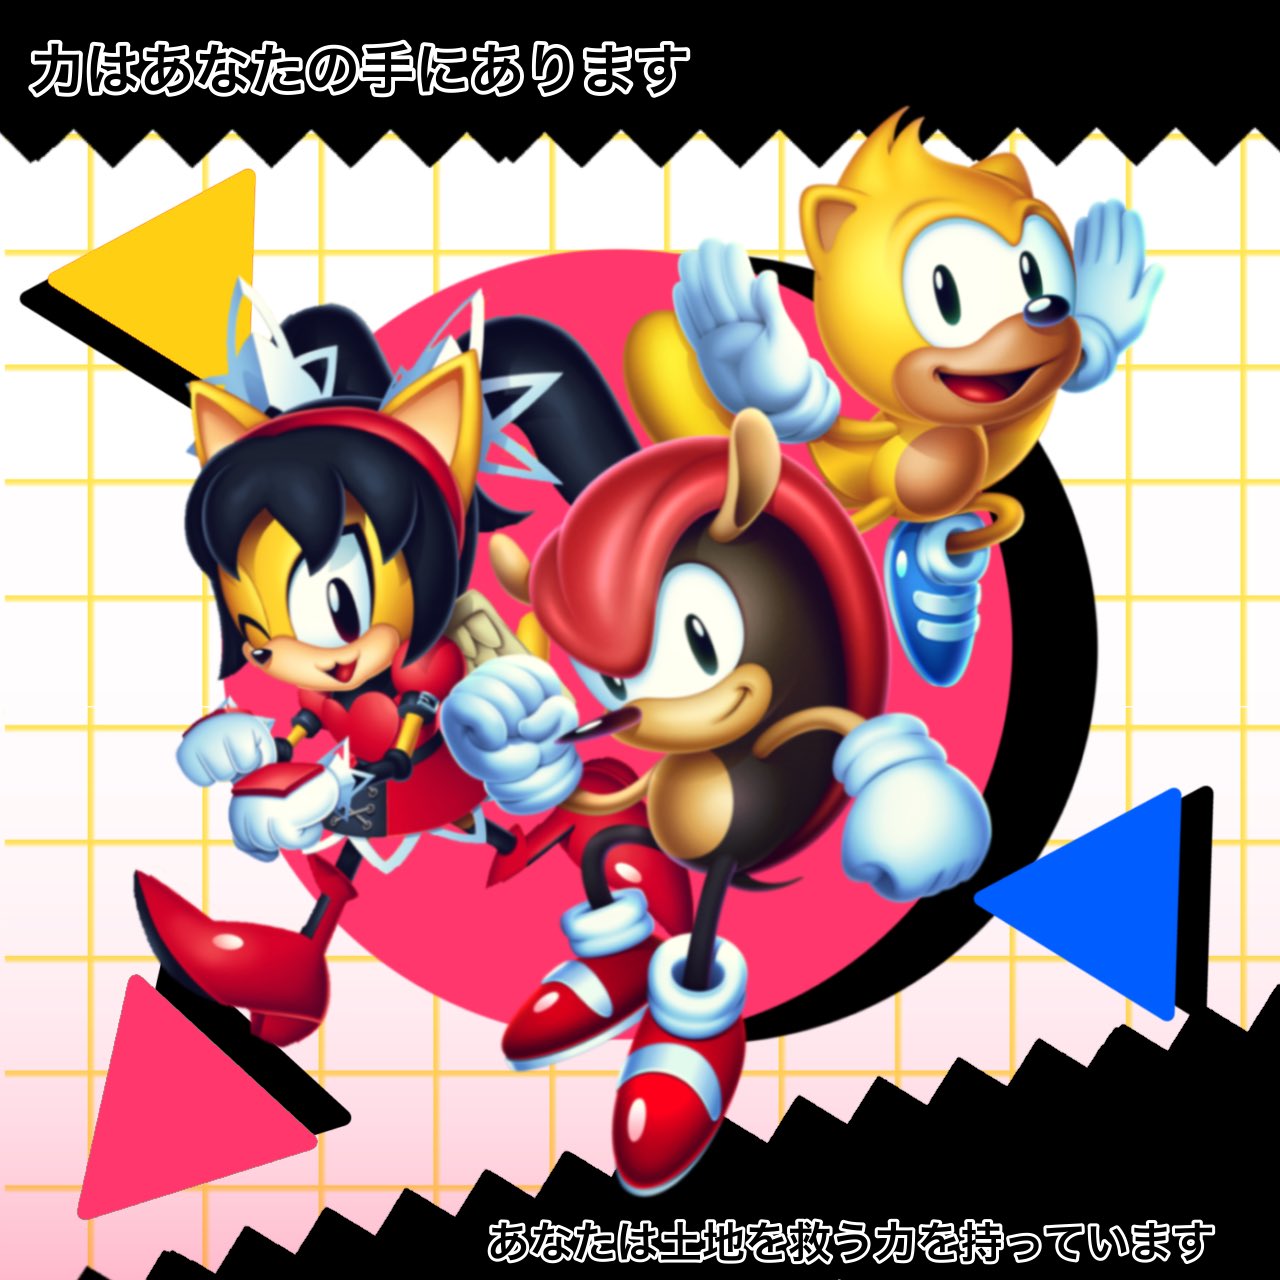 Would Sega/Sonic Team ever put classic versions of characters